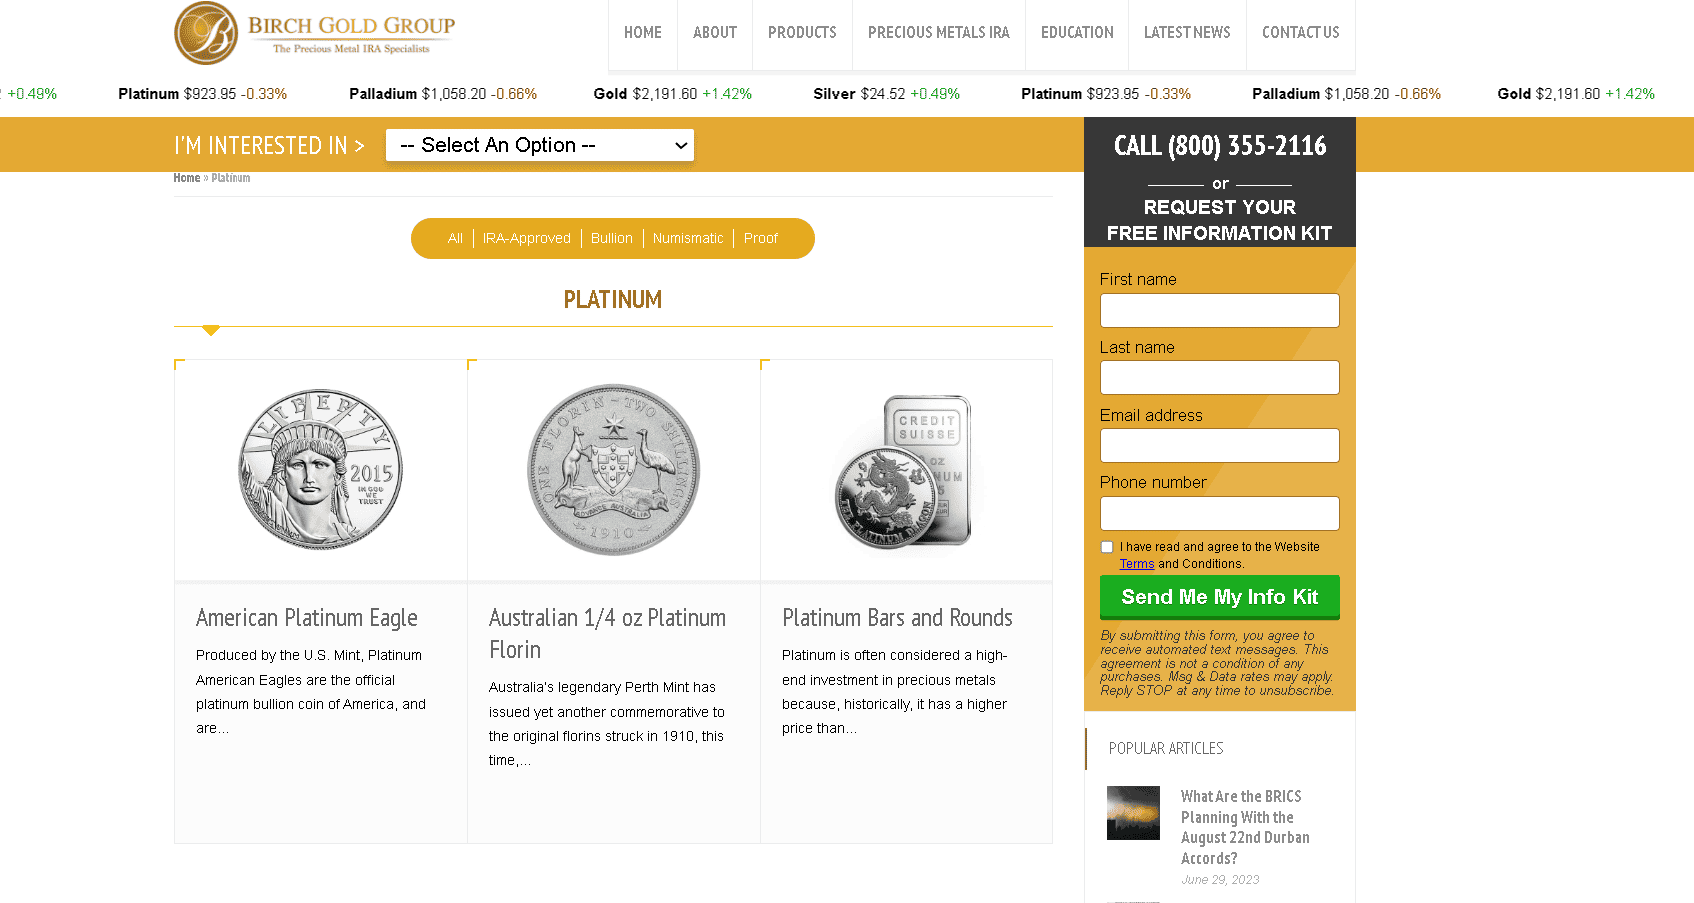 Birch Gold Group sell platinum coins and bars